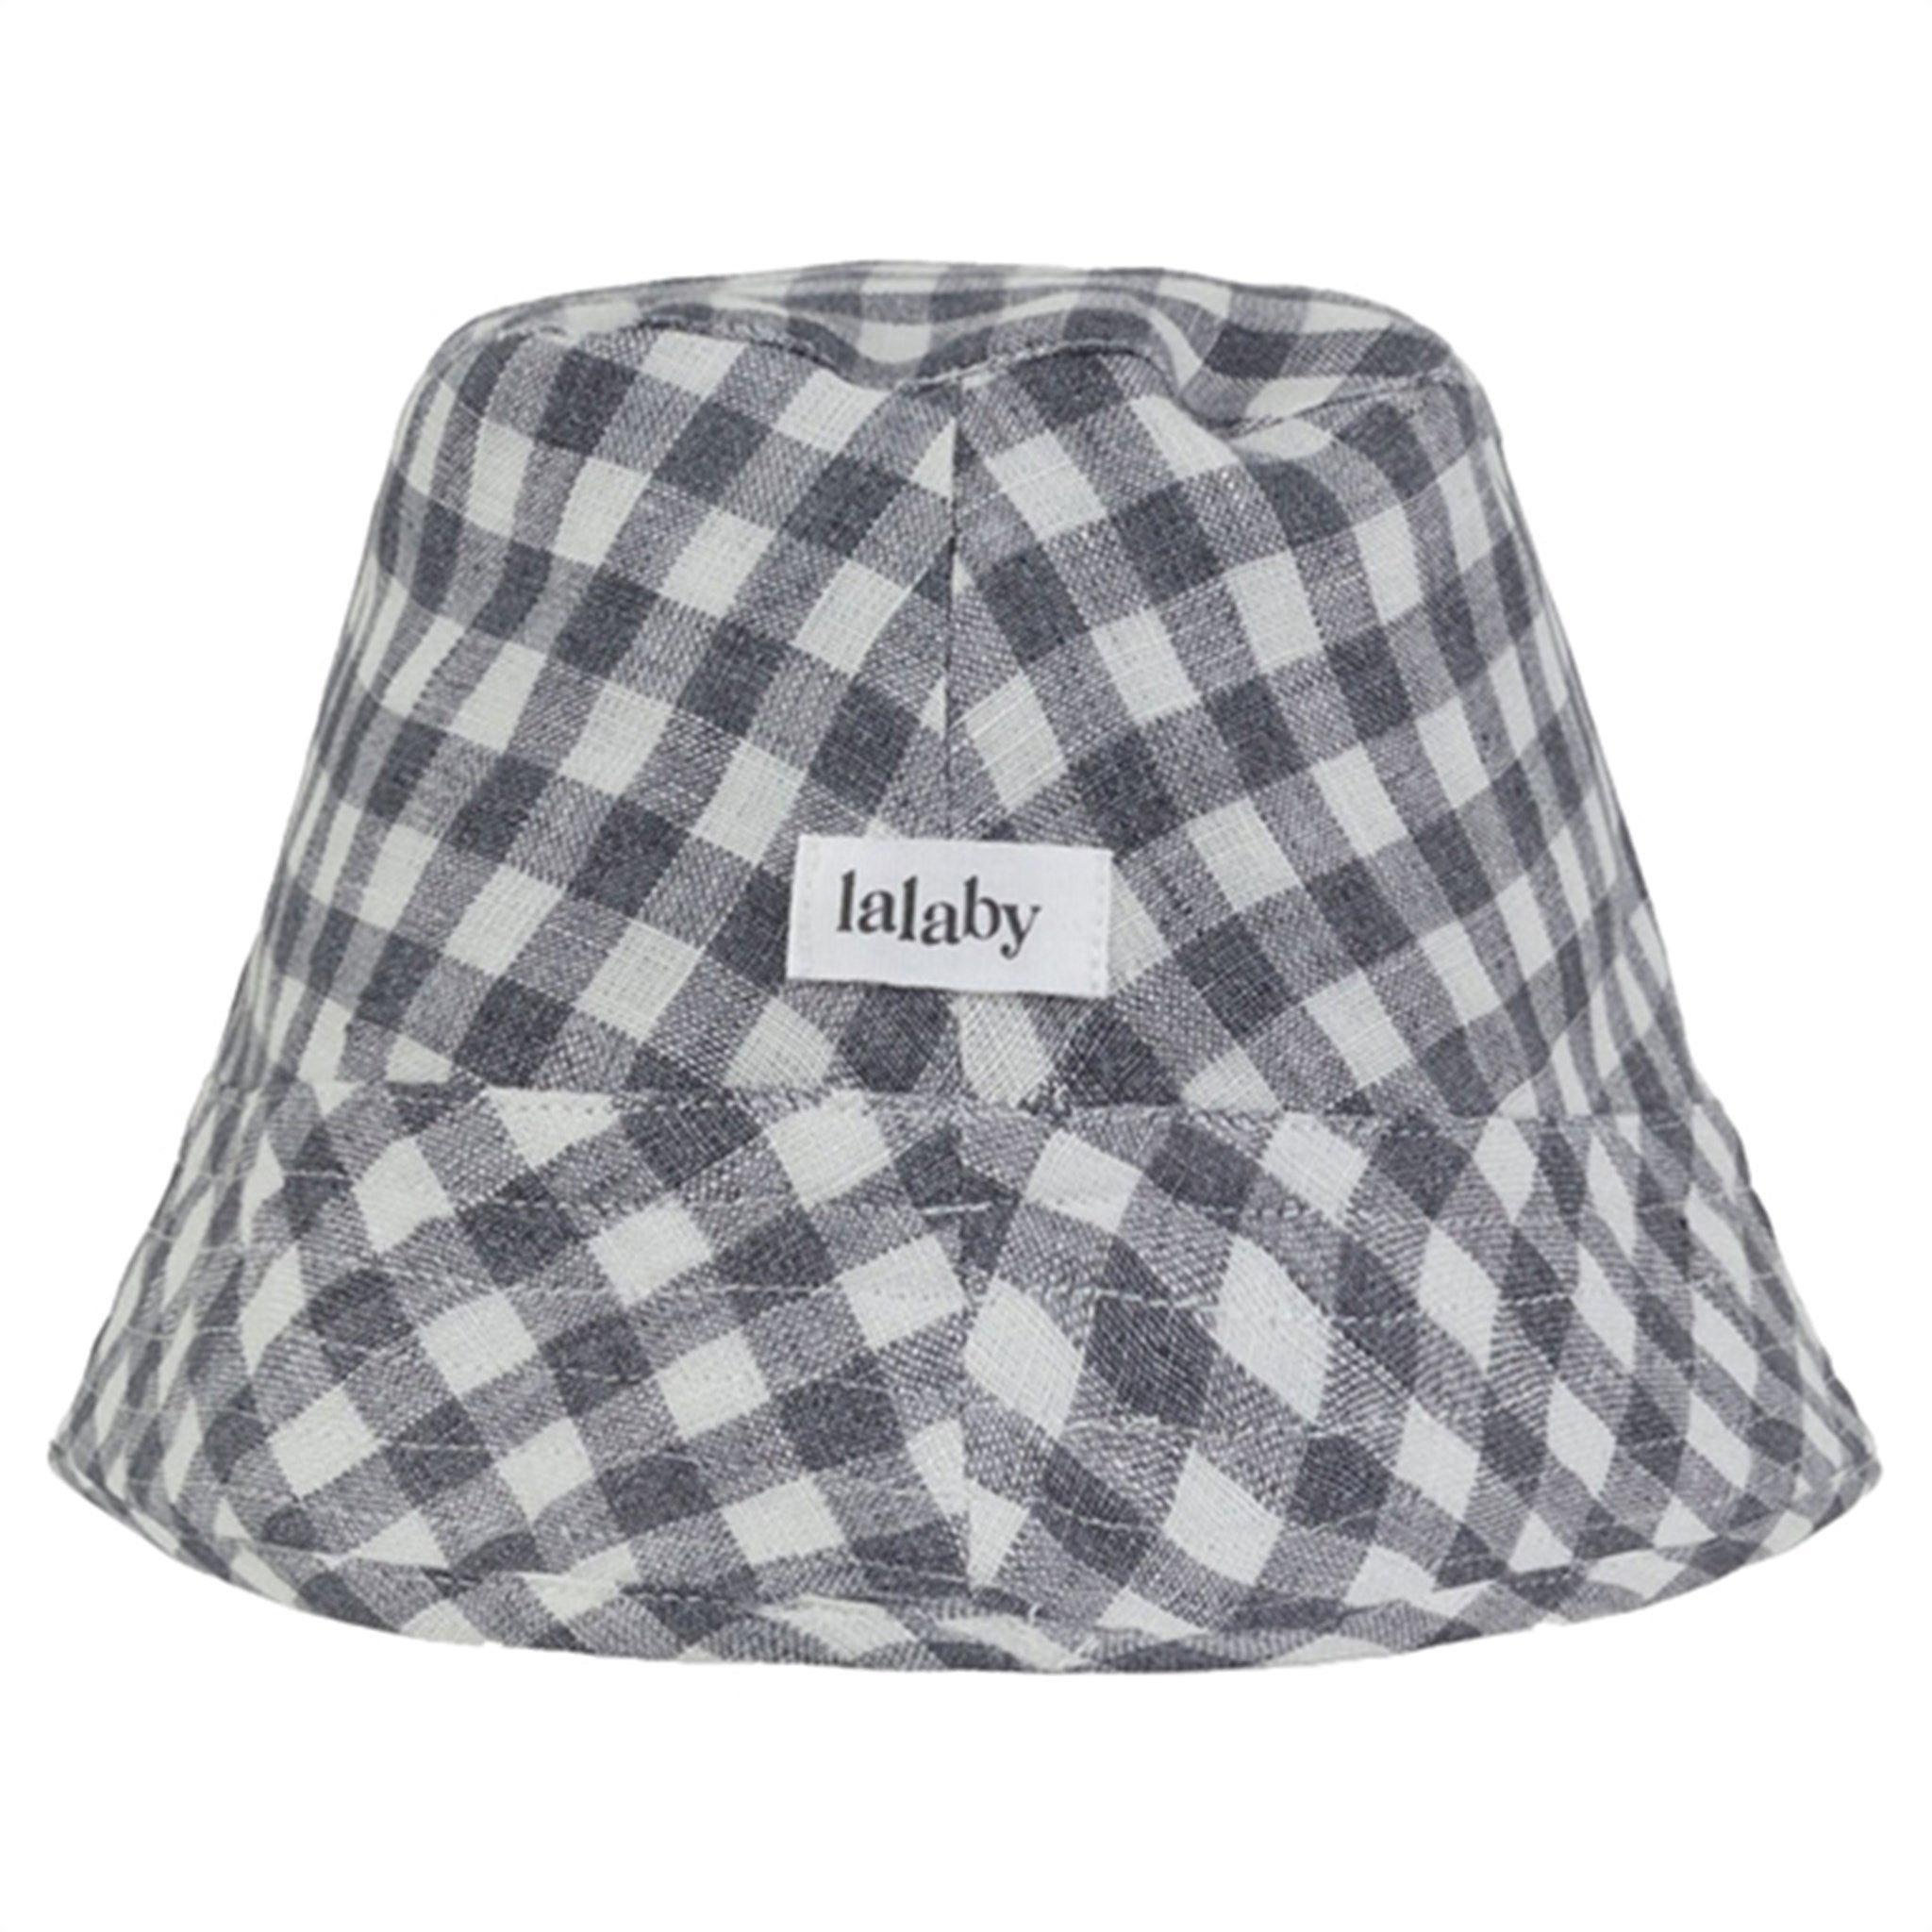 lalaby Elephant Check Loui Hat 2